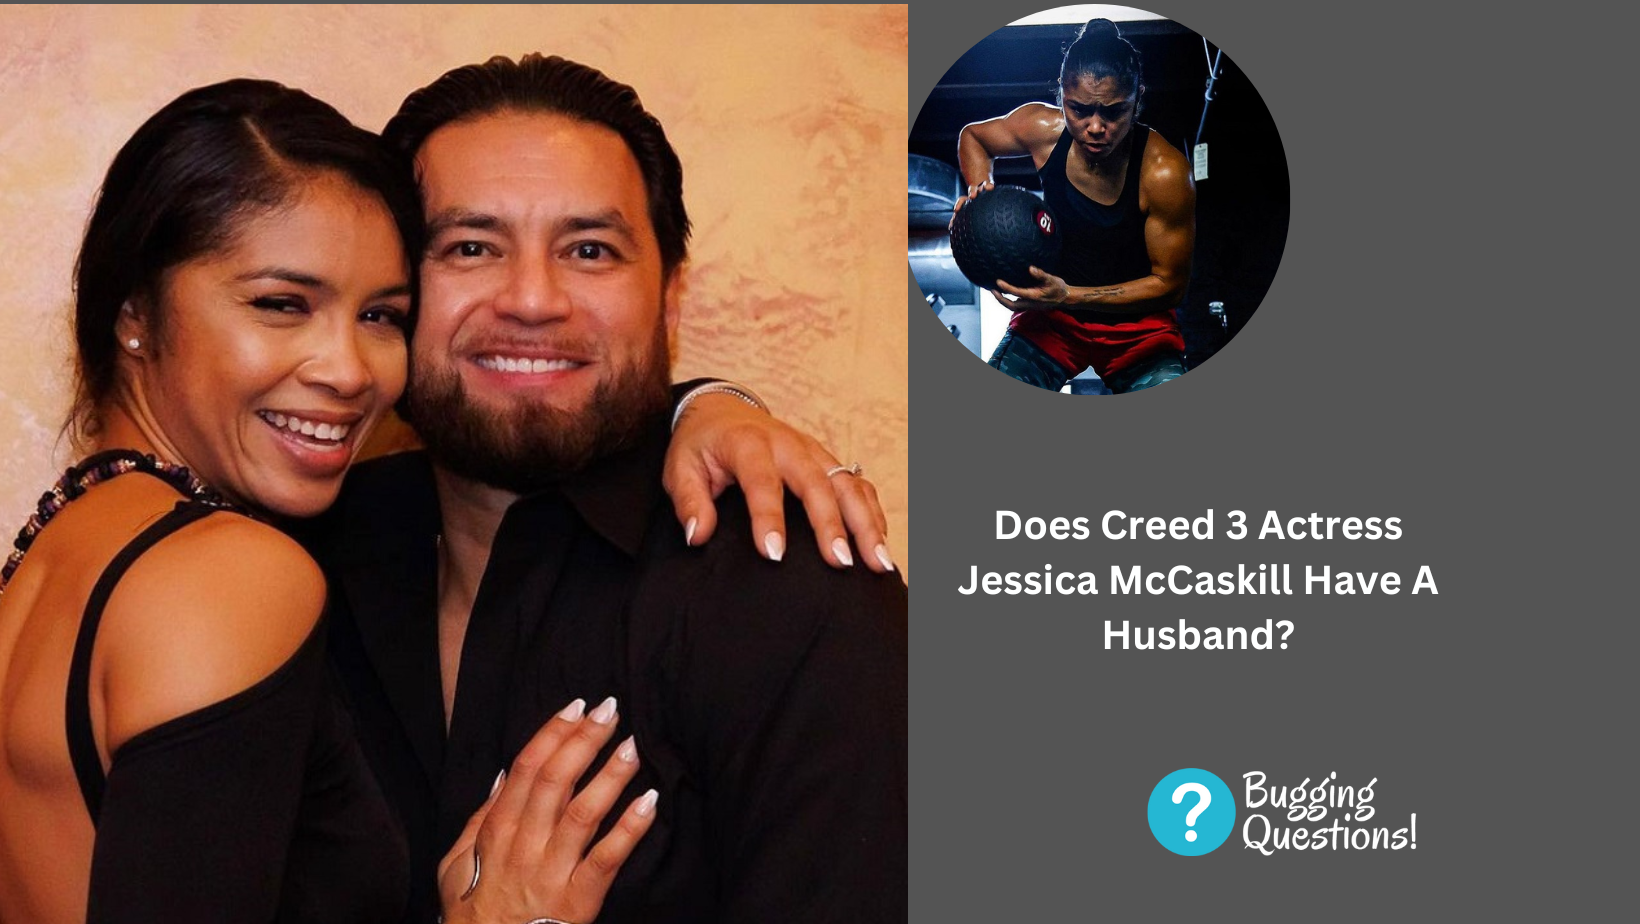 Does Creed 3 Actress Jessica McCaskill Have A Husband?